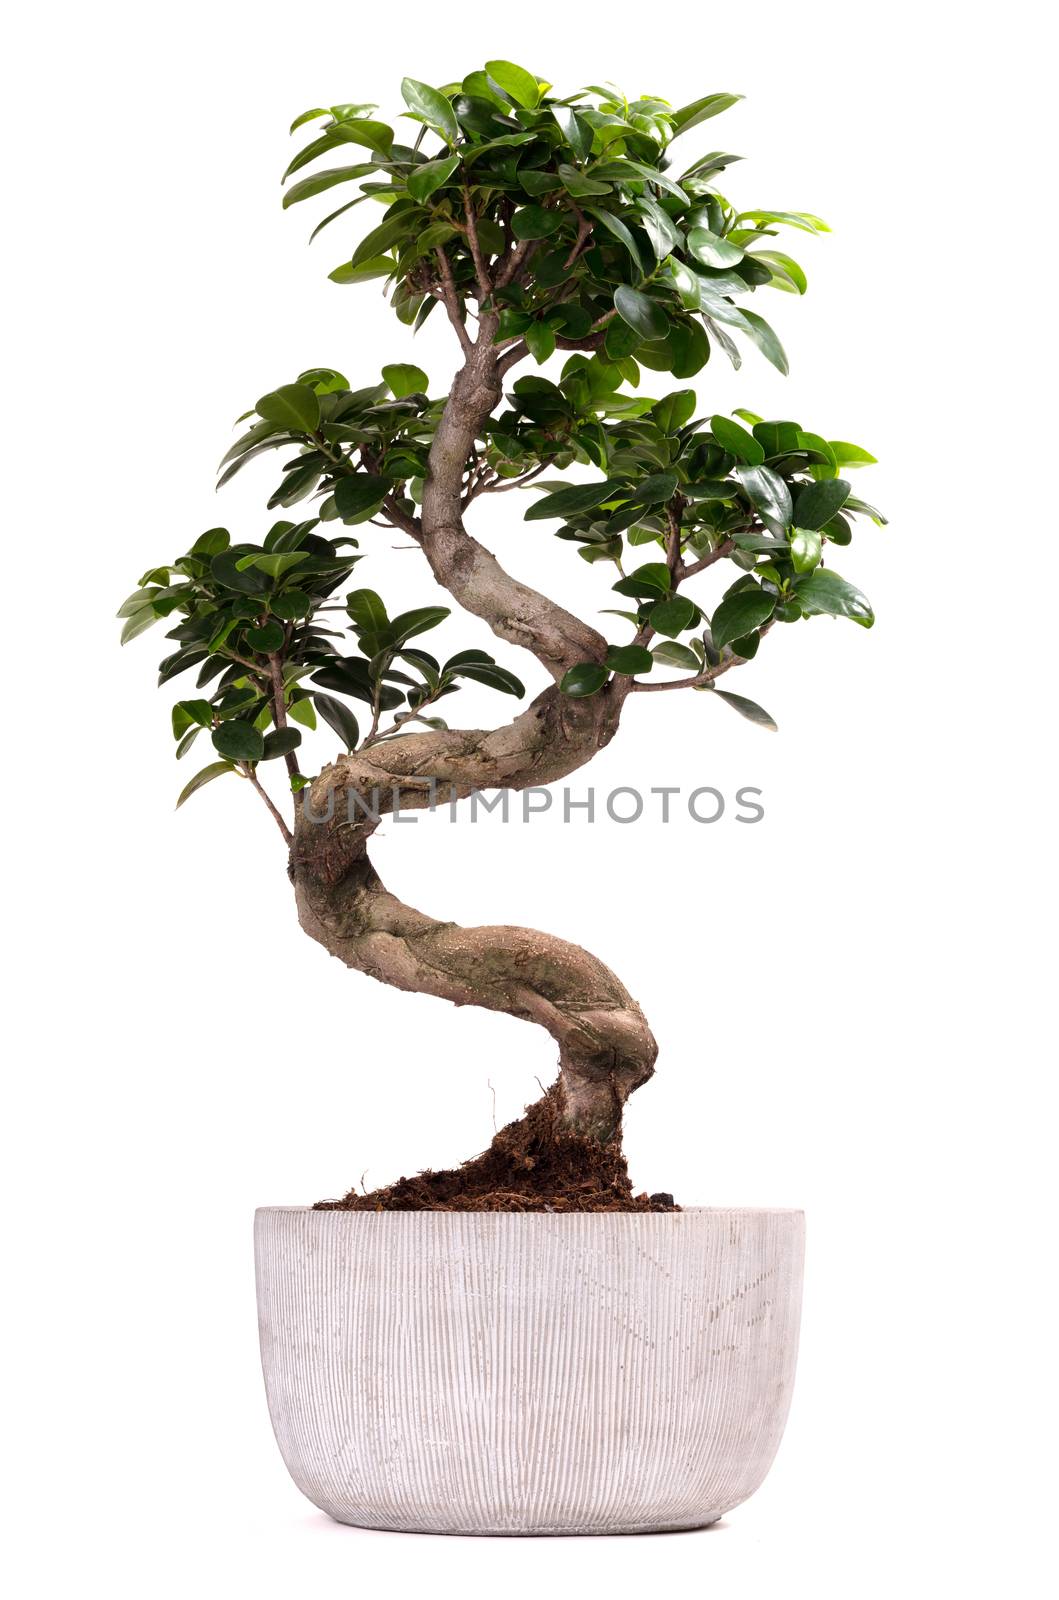 Bonsai tree potted plant by michaklootwijk